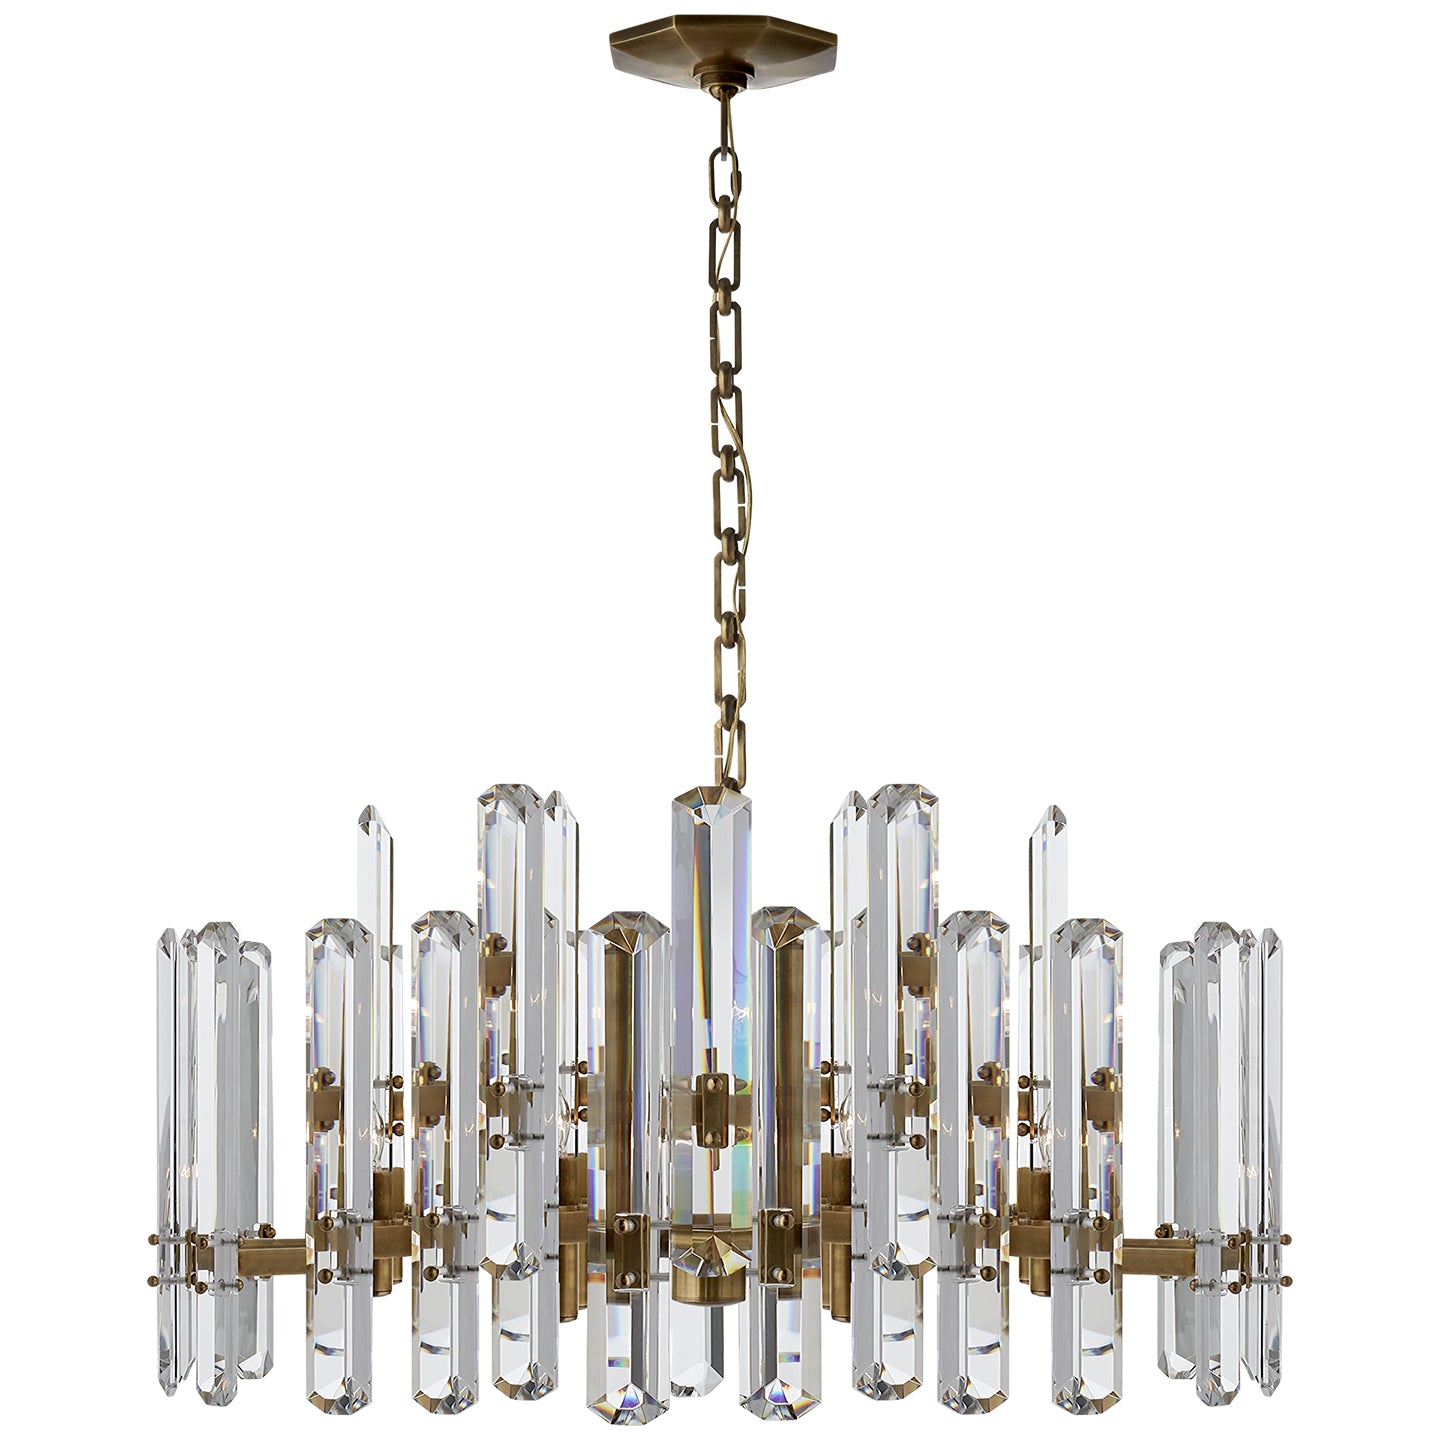 Load image into Gallery viewer, Visual Comfort Signature - ARN 5125HAB-CG - 18 Light Chandelier - Bonnington - Hand-Rubbed Antique Brass
